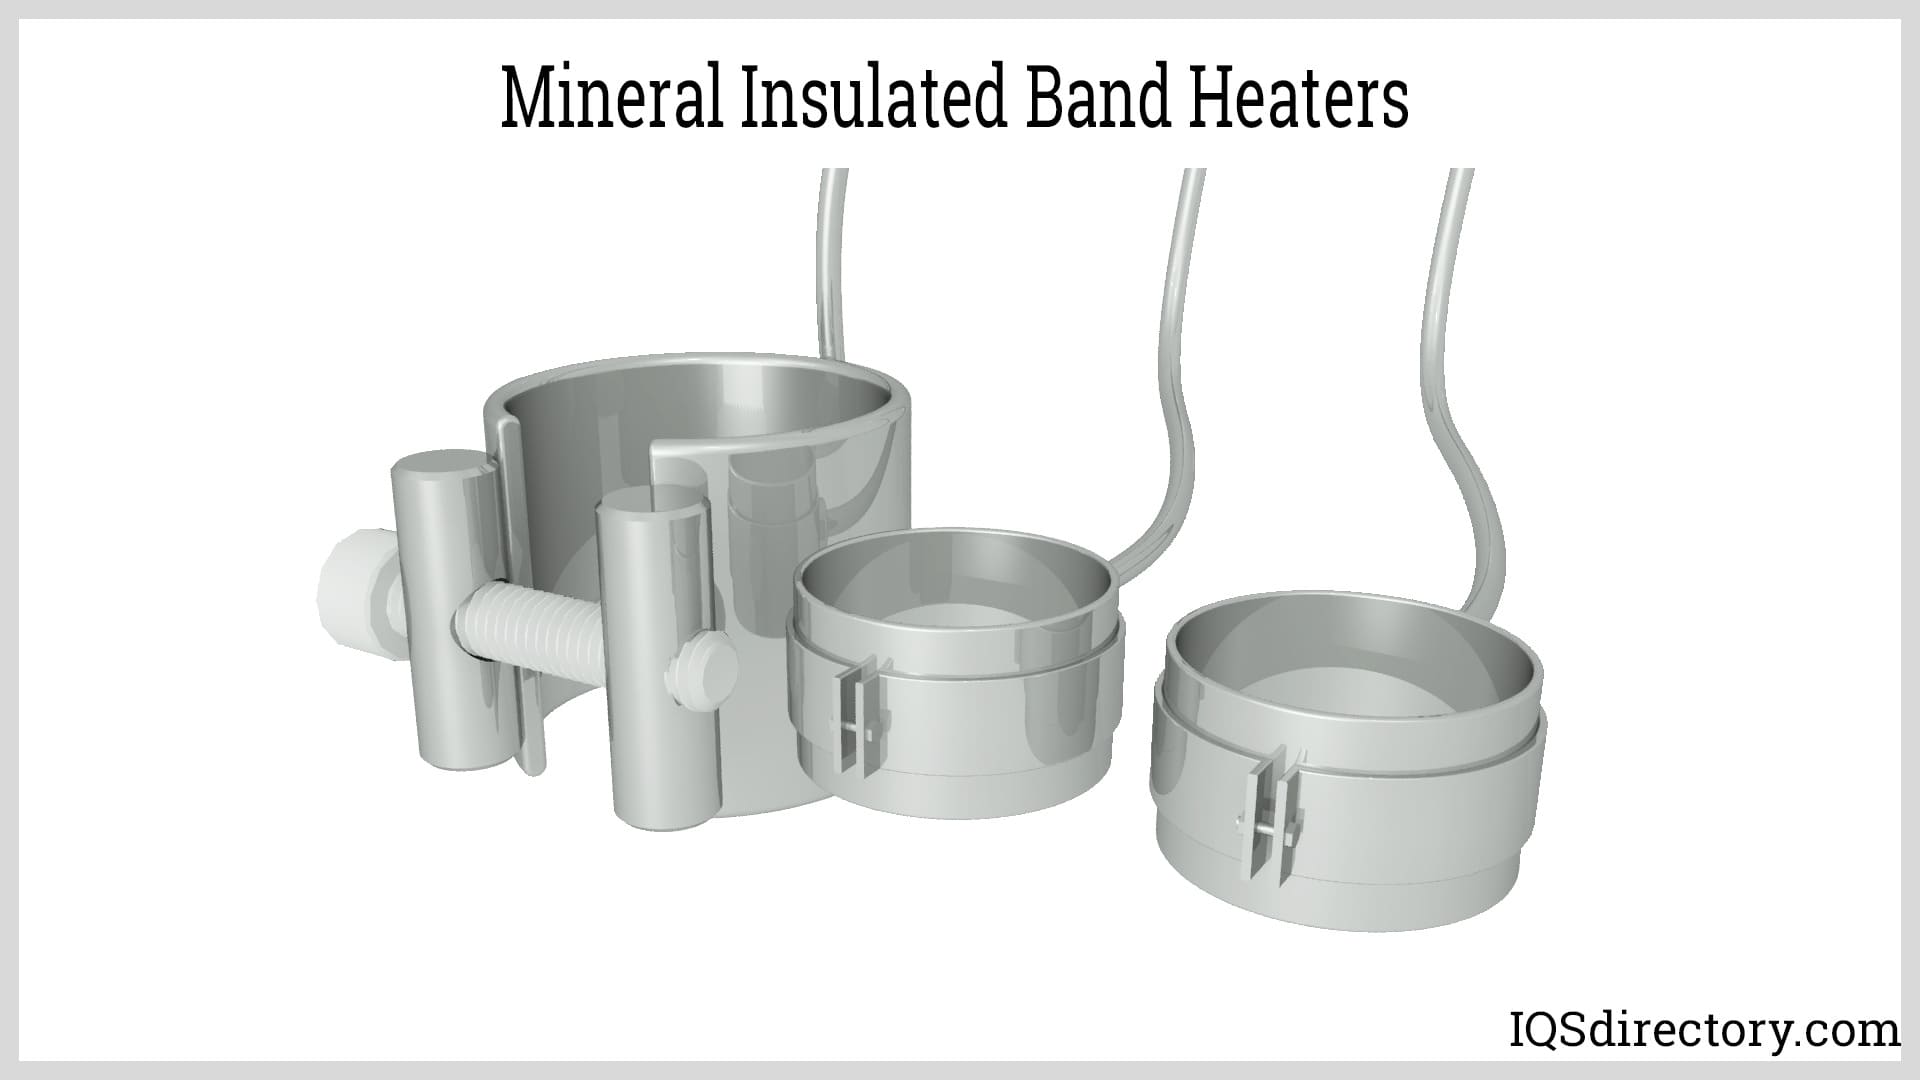 Mineral Insulated Band Heaters